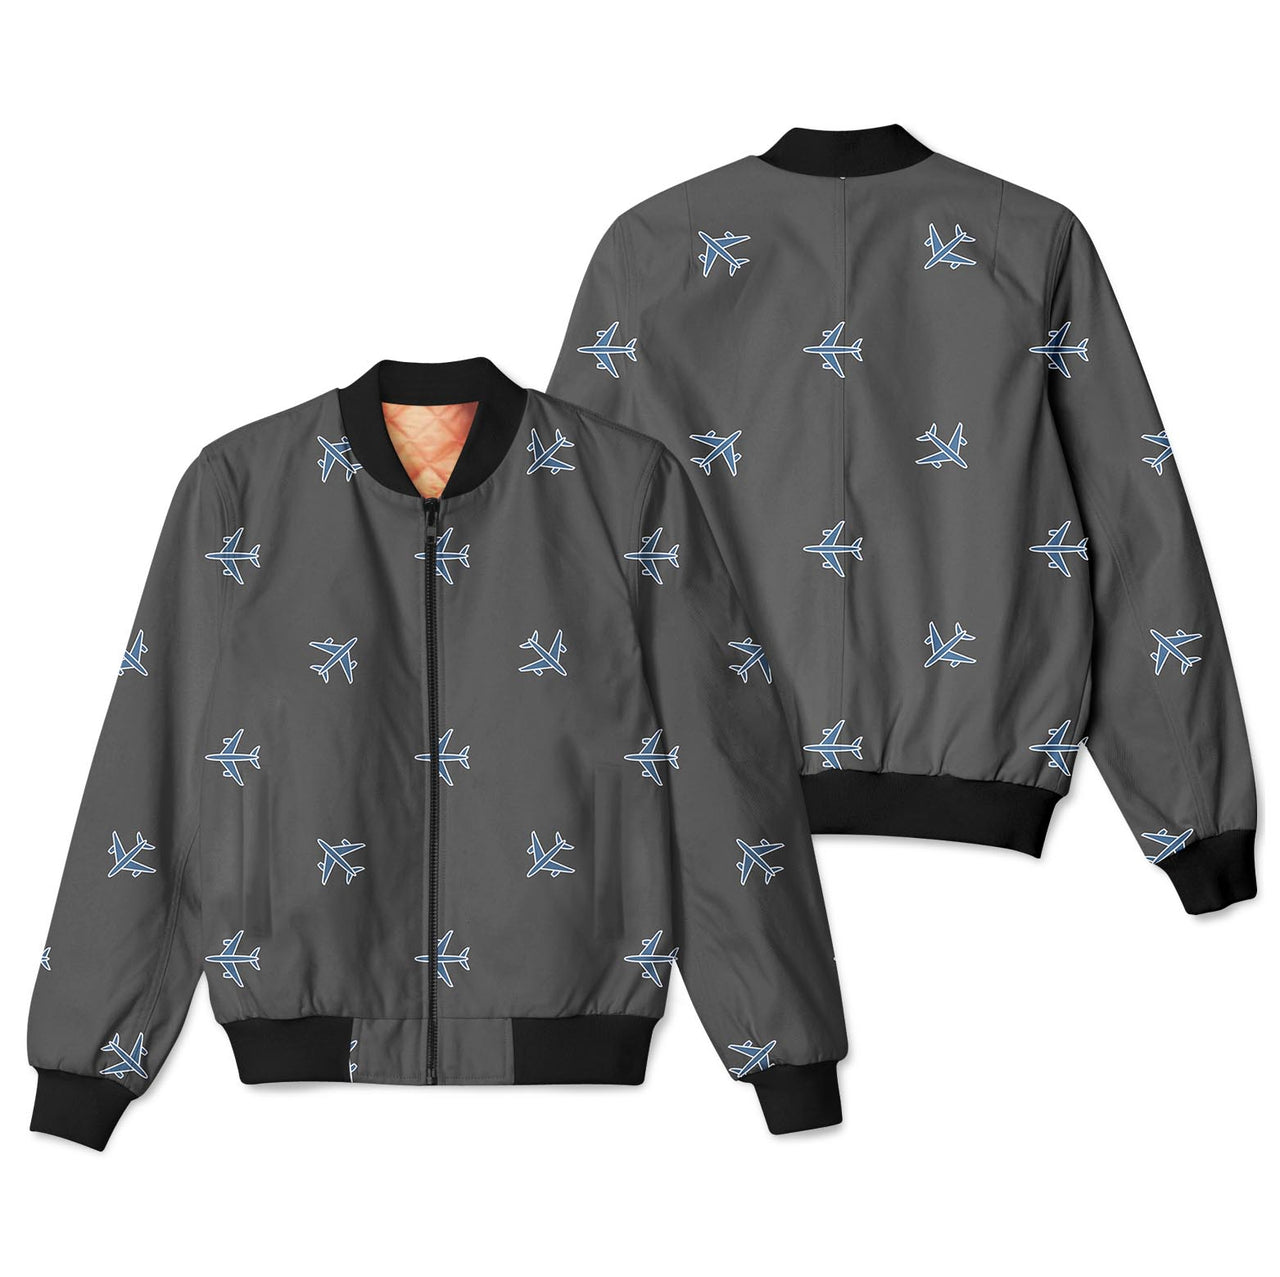 Nice Airplanes (Gray) Designed 3D Pilot Bomber Jackets